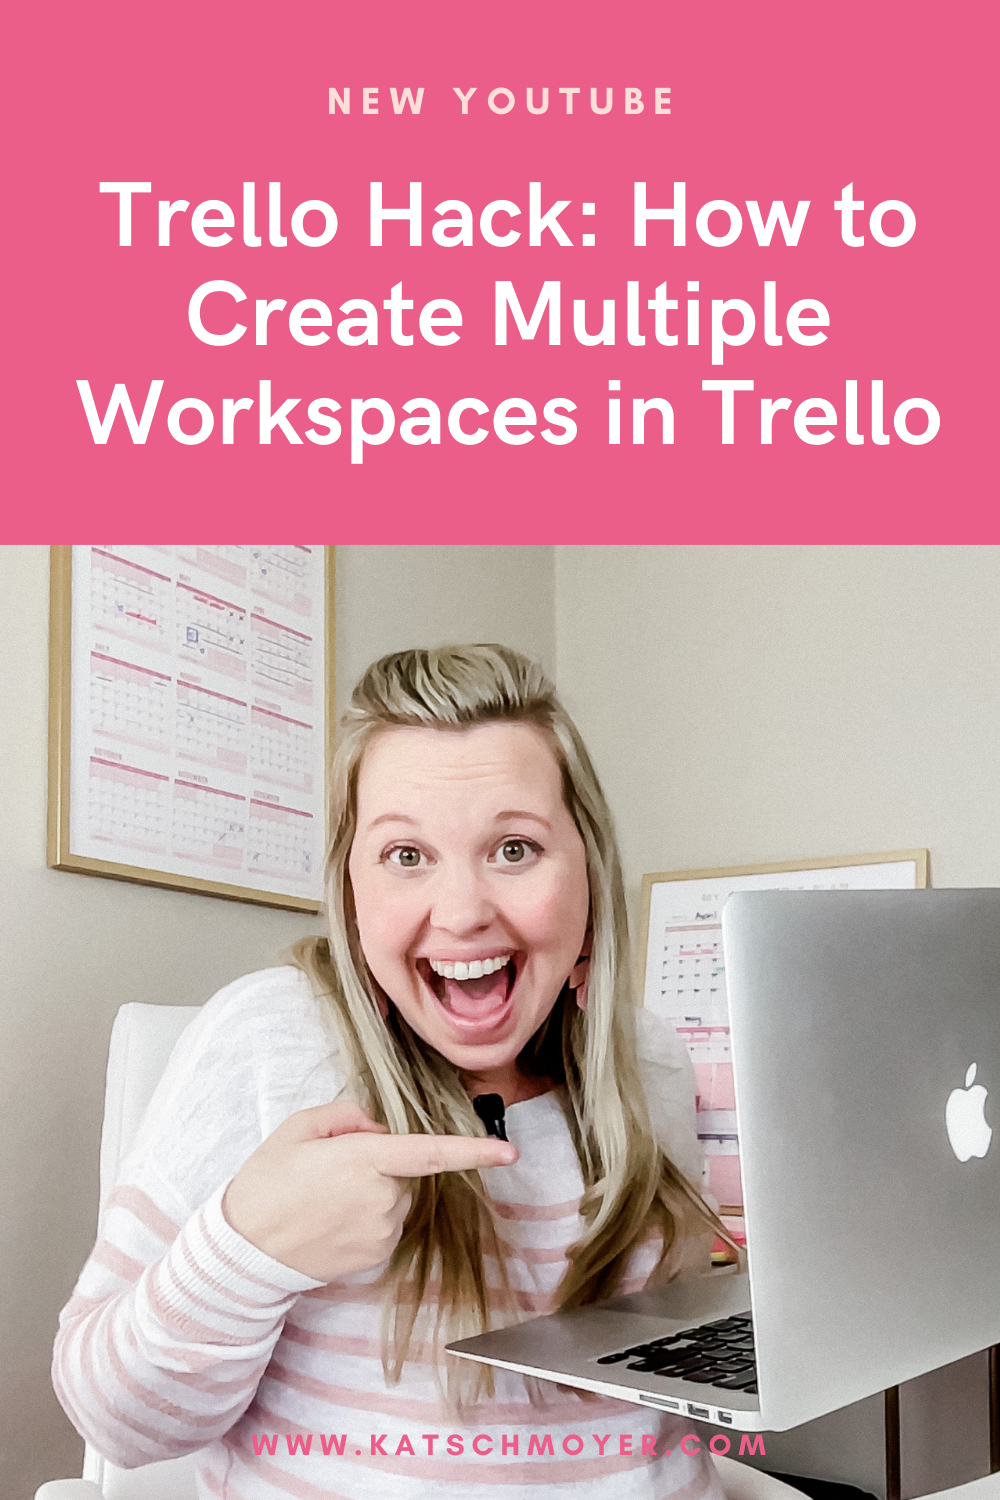 Trello Hack: How to Create Multiple Workspaces